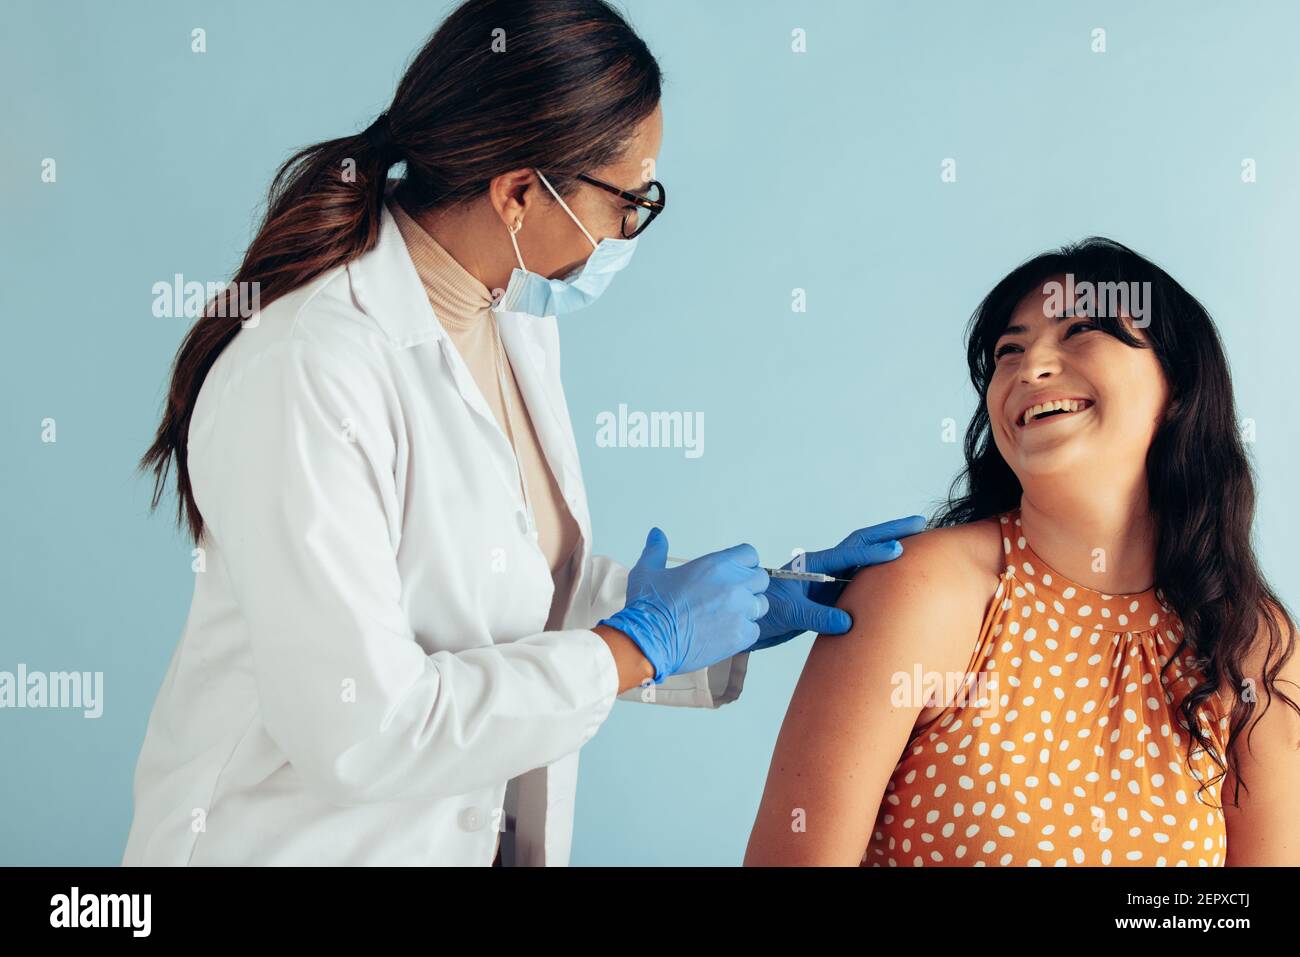 Smiling woman getting vaccinated. Doctor wearing face mask and protective gloves giving vaccine injection a happy female patient. Stock Photo